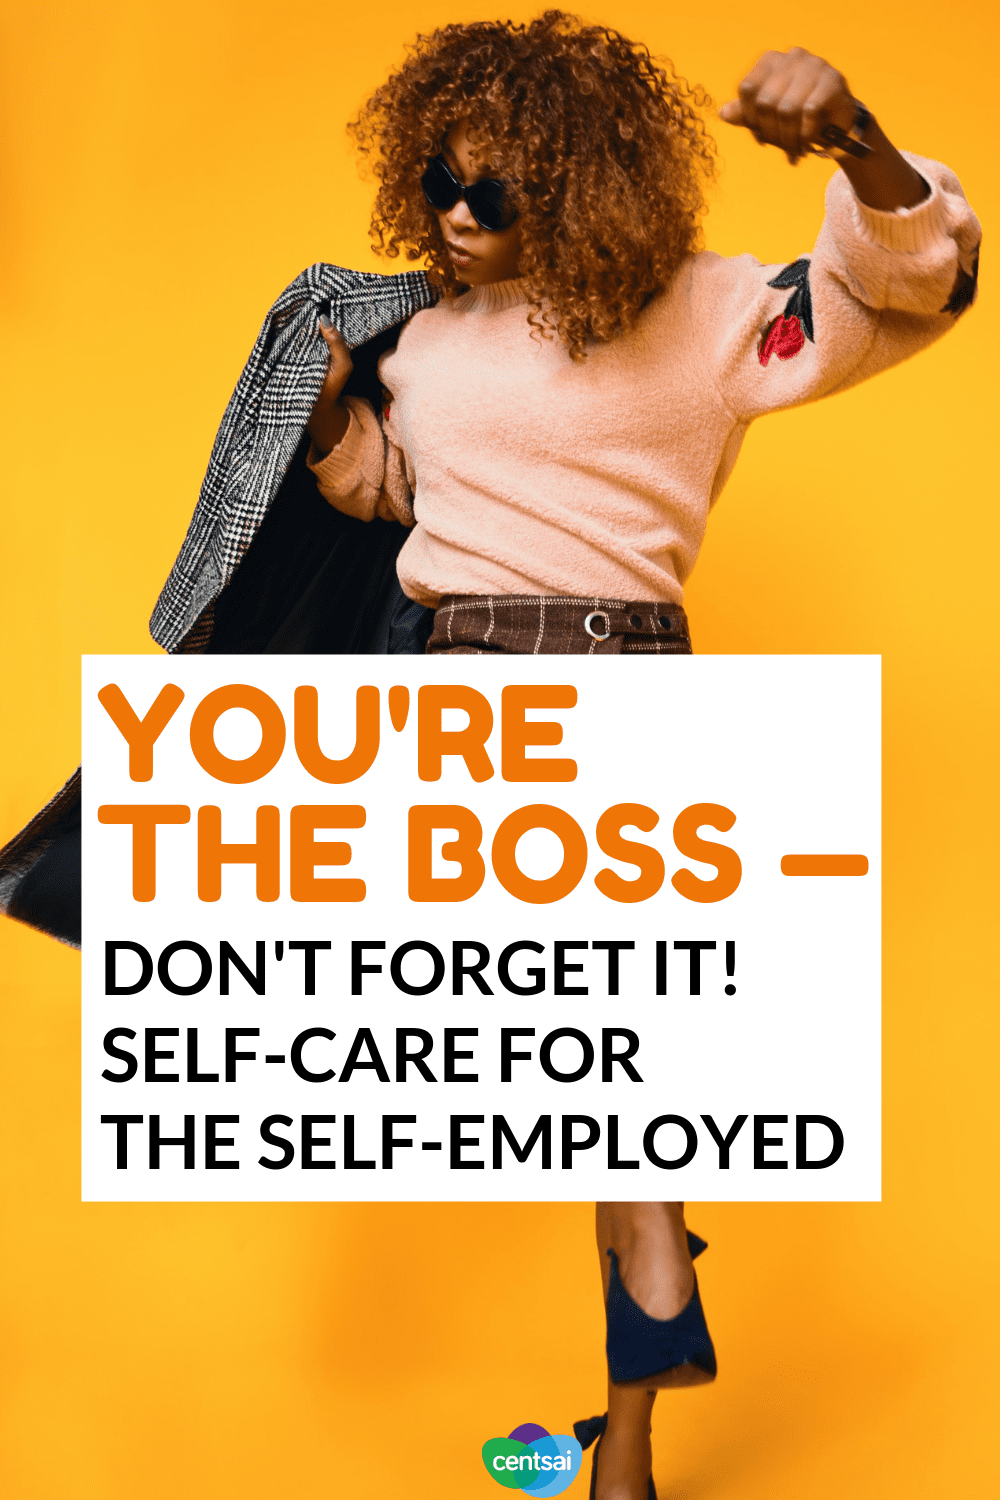 You're the Boss — Don't Forget It! Self-Care for the #SelfEmployed If you're self-employed, you know how hard self-care can be. Check out these tips on how to take care of yourself while still meeting your clients' needs. #entrepreneur #ideas